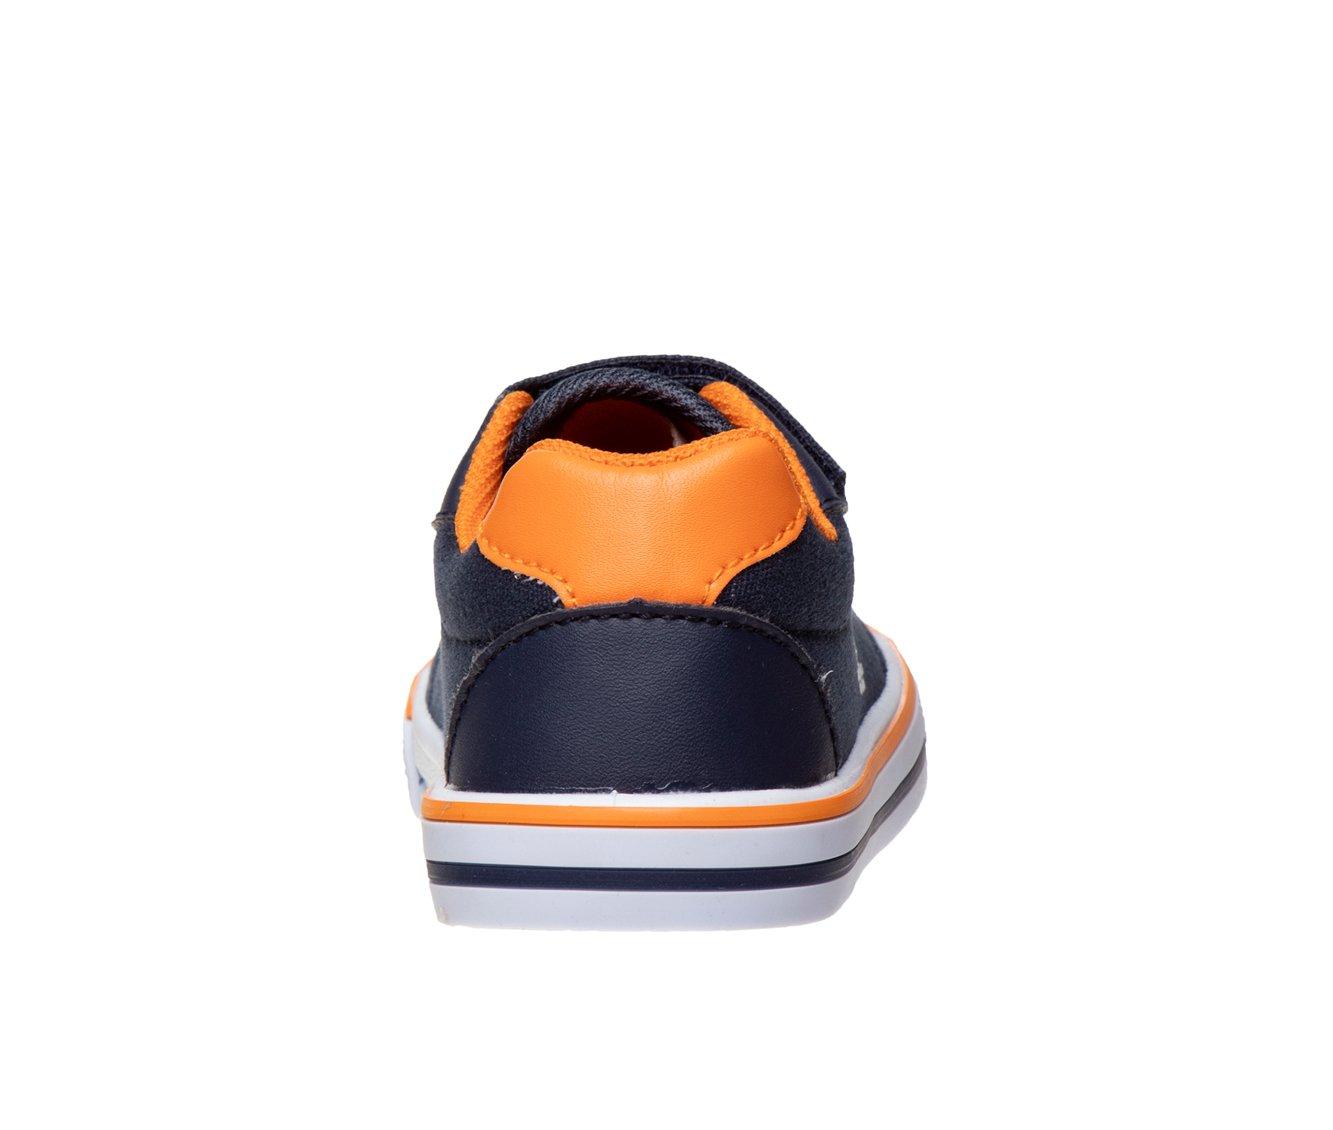 Boys' Beverly Hills Polo Club Toddler Adjustable Strap Sneakers